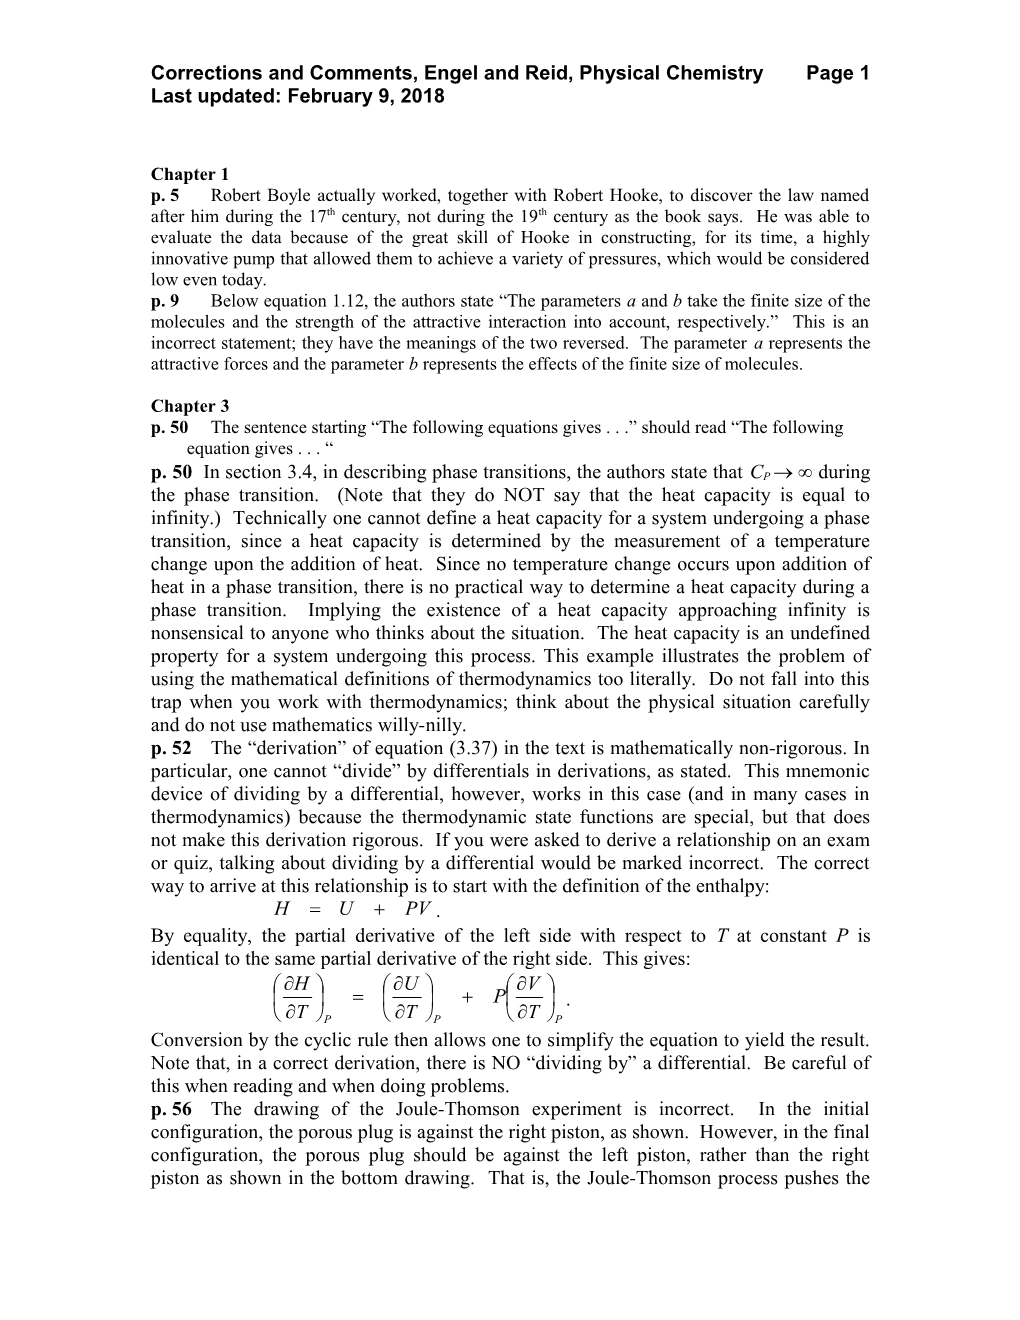 Corrections to Noggle, Physical Chemistry, 3Rd Edition, 1St Printing